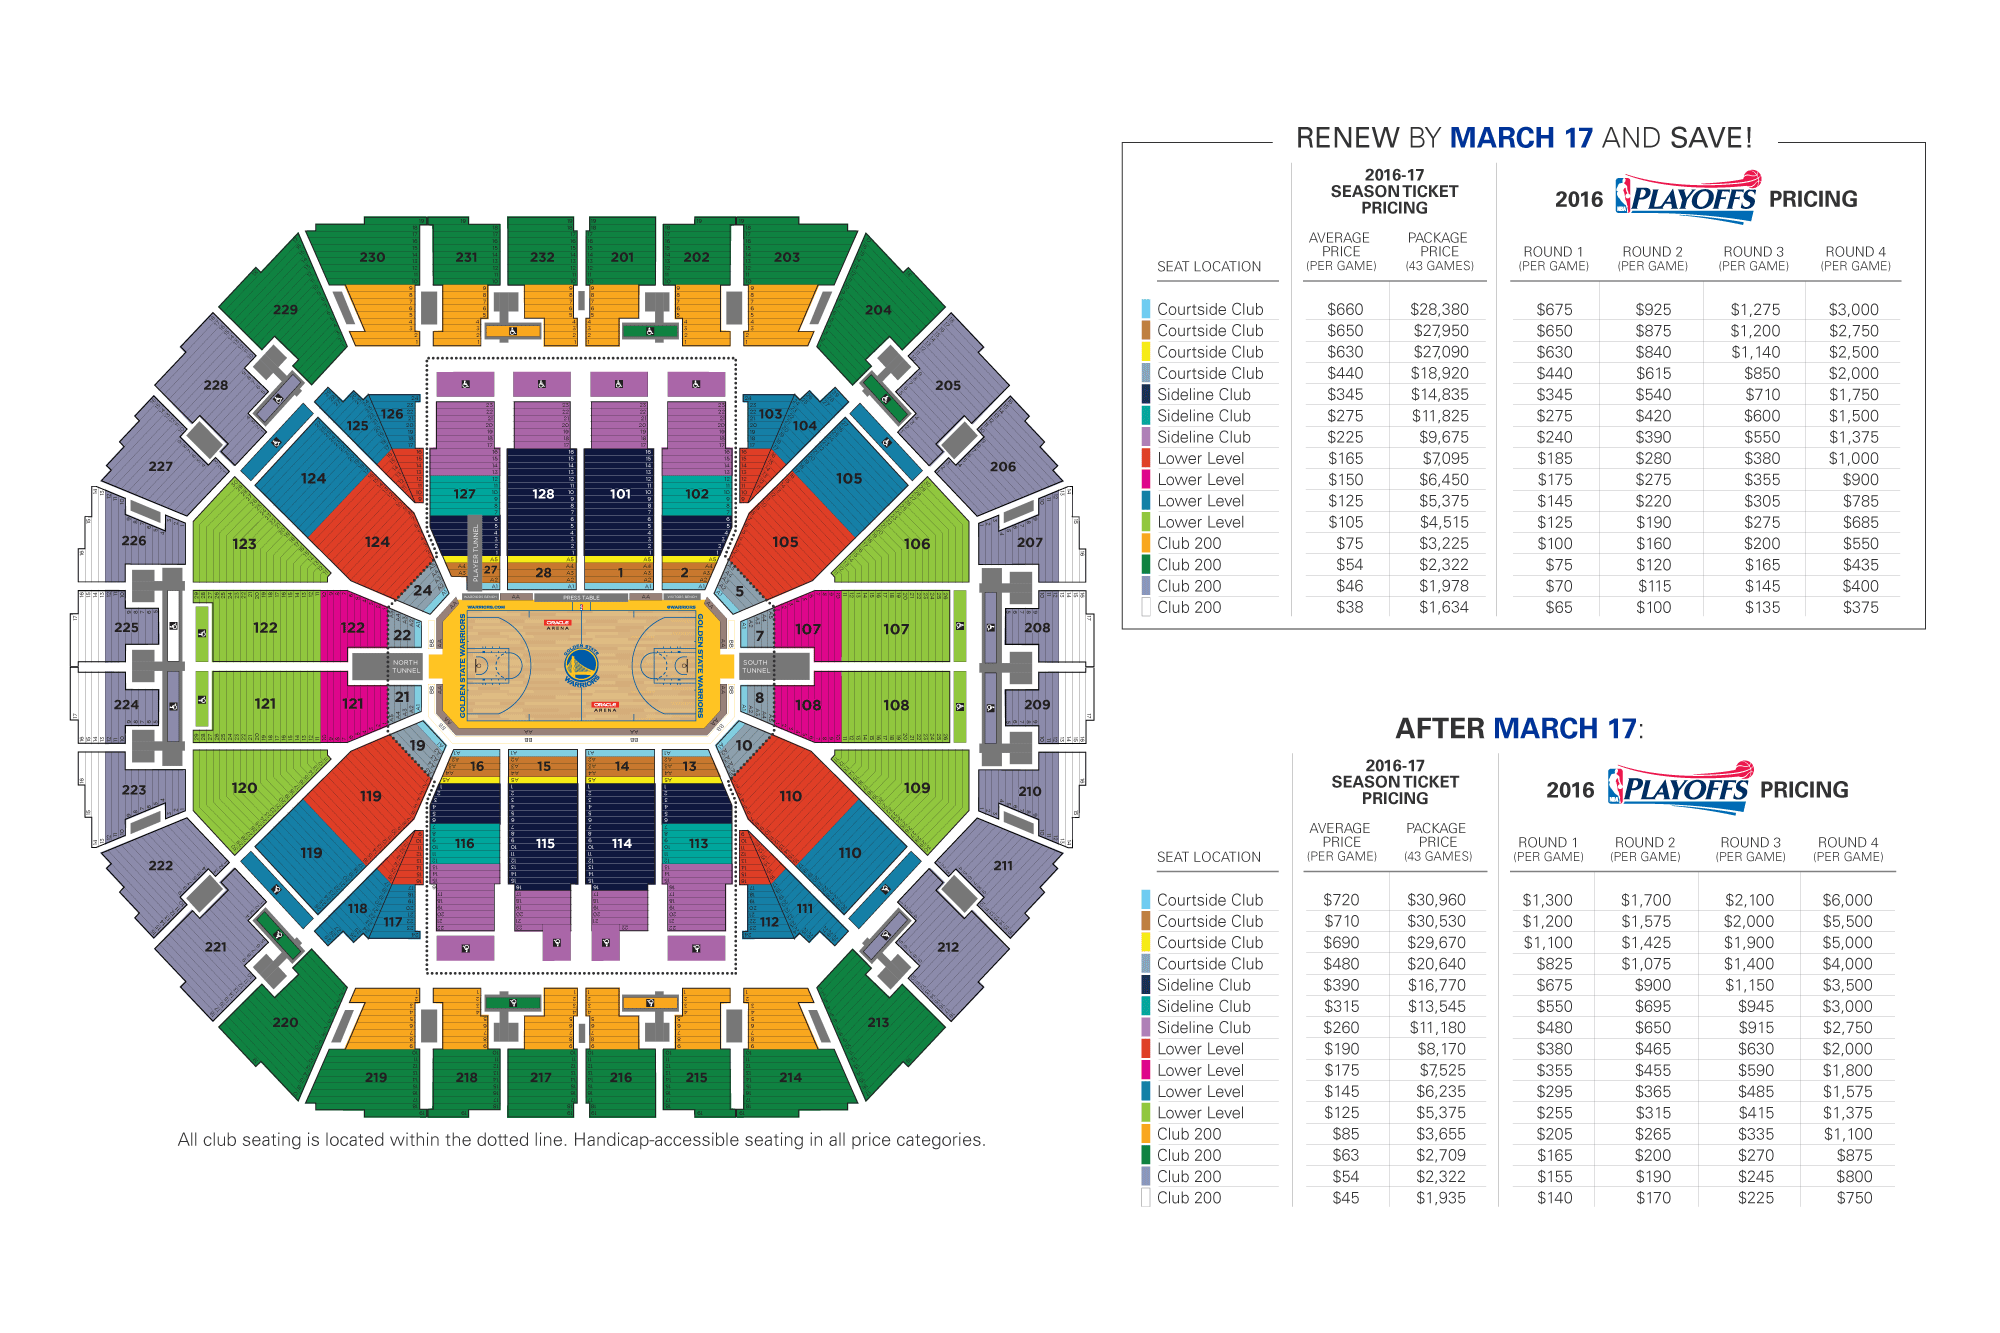 Warriors season tickets to go up another 1520 for next season r/nba